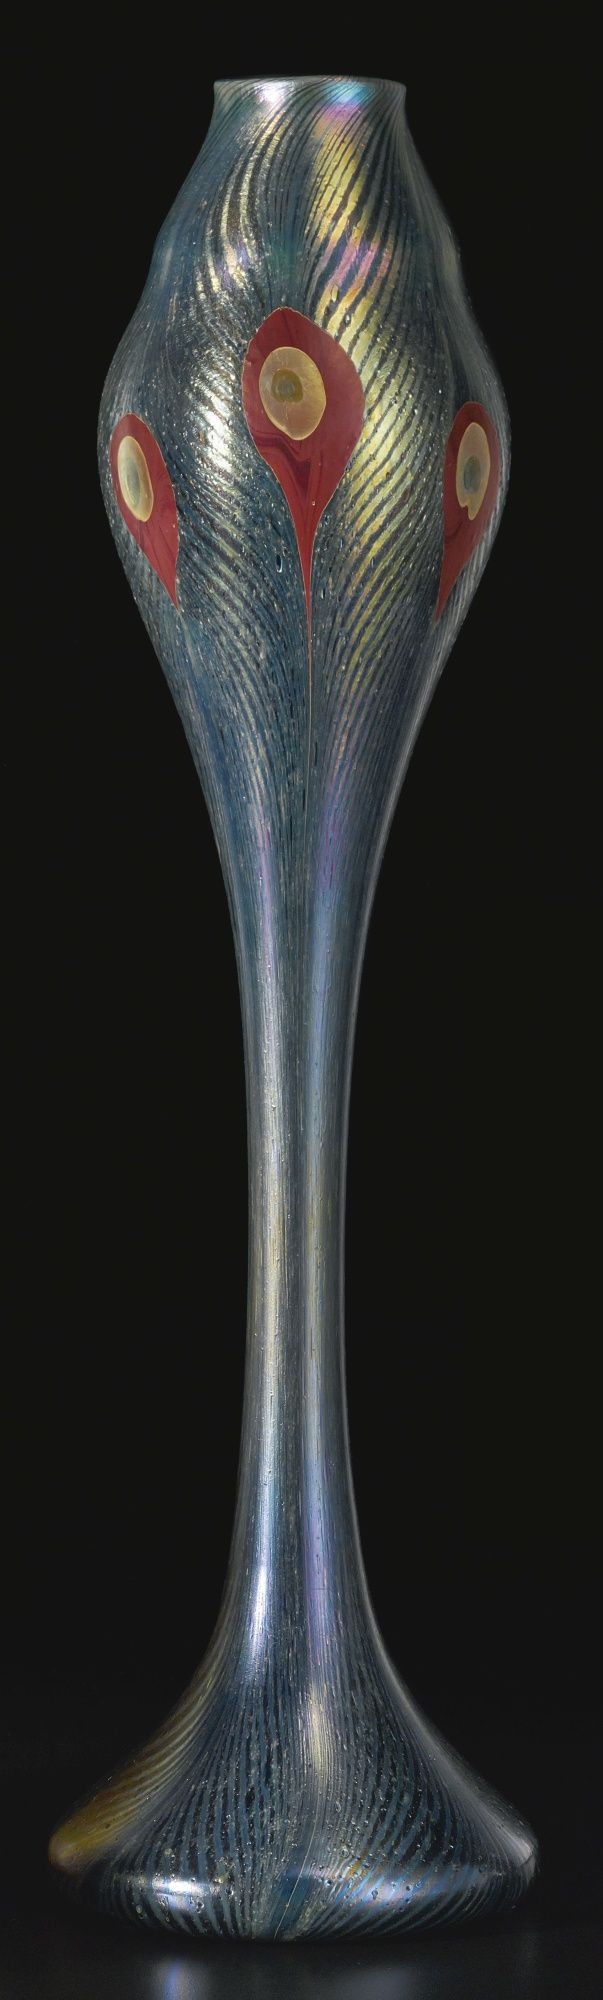 14 Ideal Lc Tiffany Favrile Vase 2024 free download lc tiffany favrile vase of 122 best tiffany treasures images on pinterest creativity crystal intended for tiffany studios cypriote peacock favrile vase united states ca